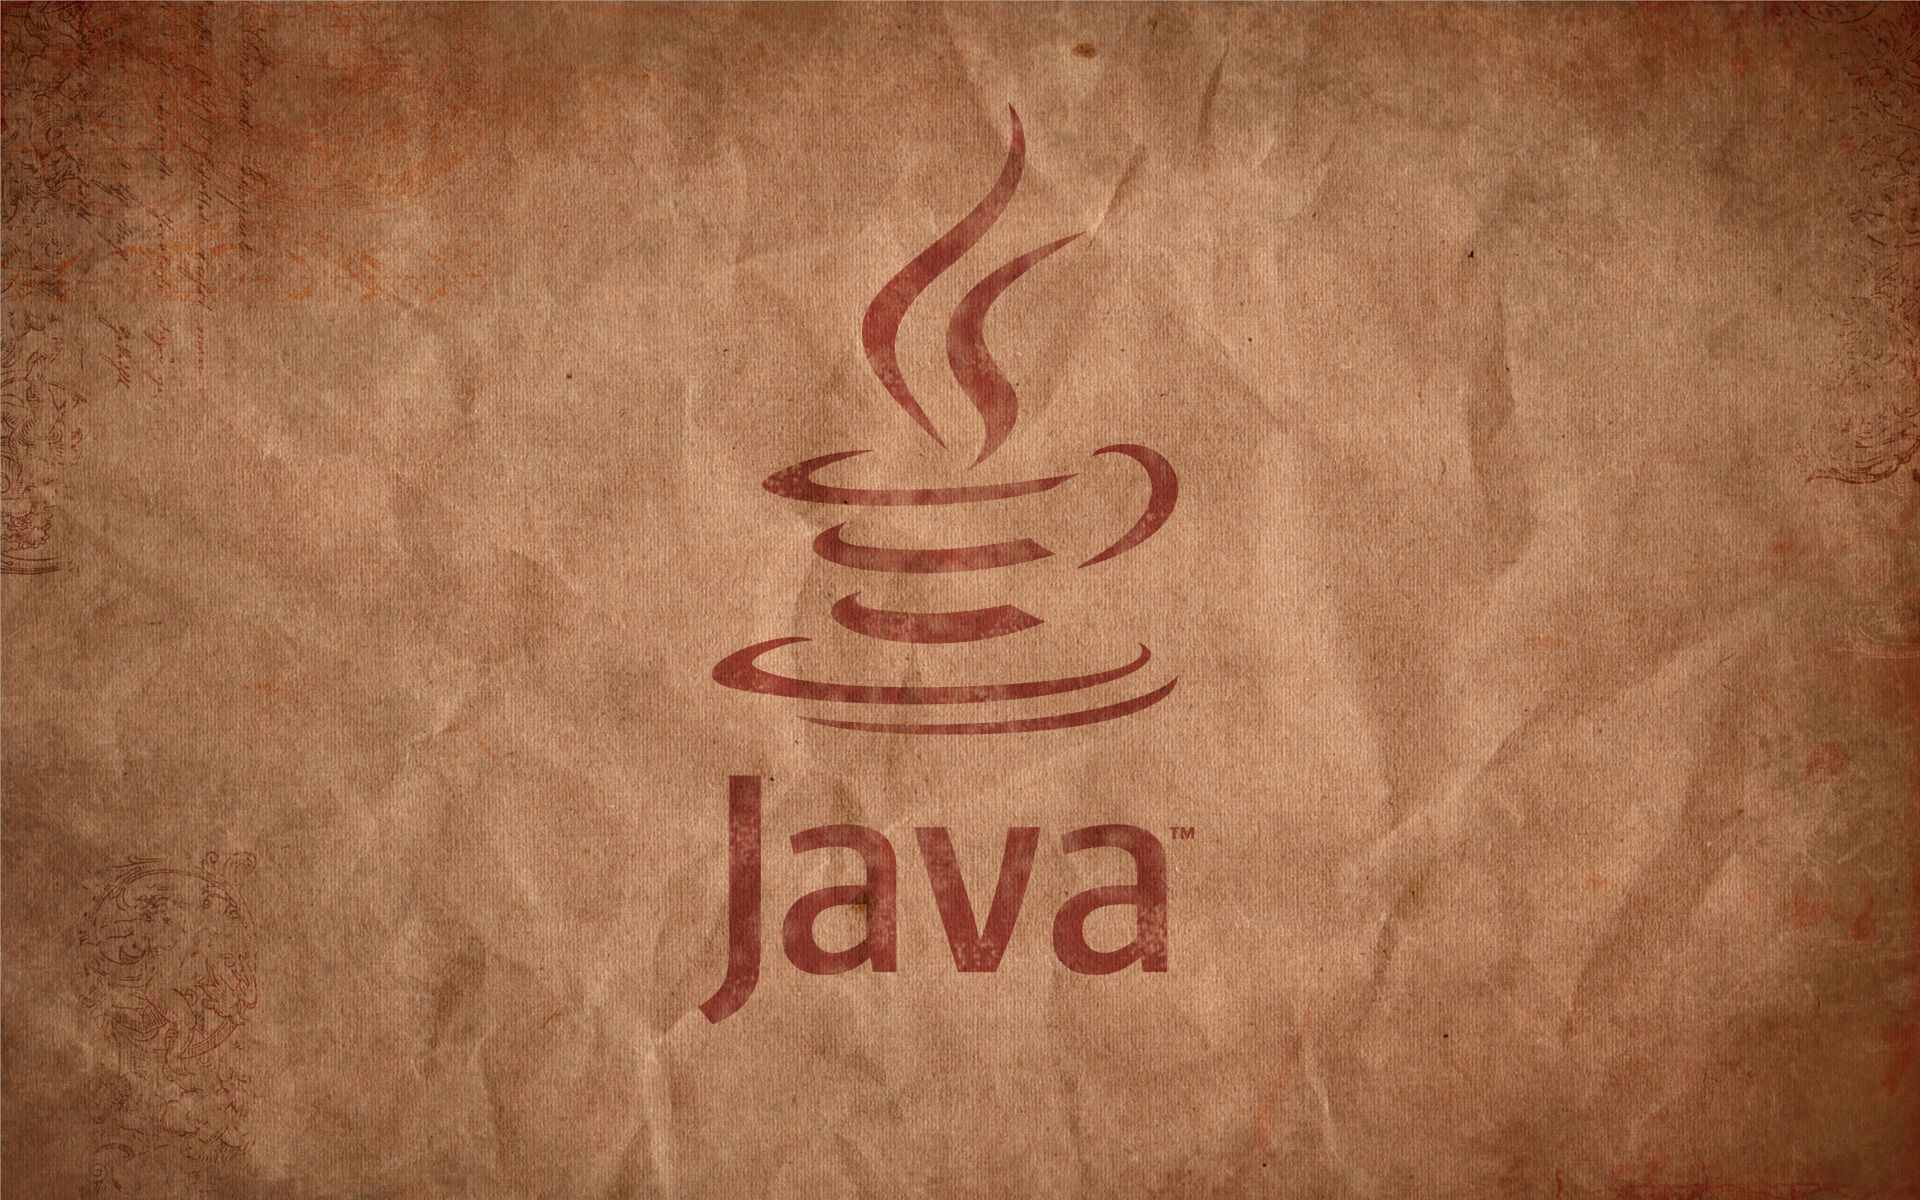 Wallpaper of Java, logo, programming, Cup of coffee background